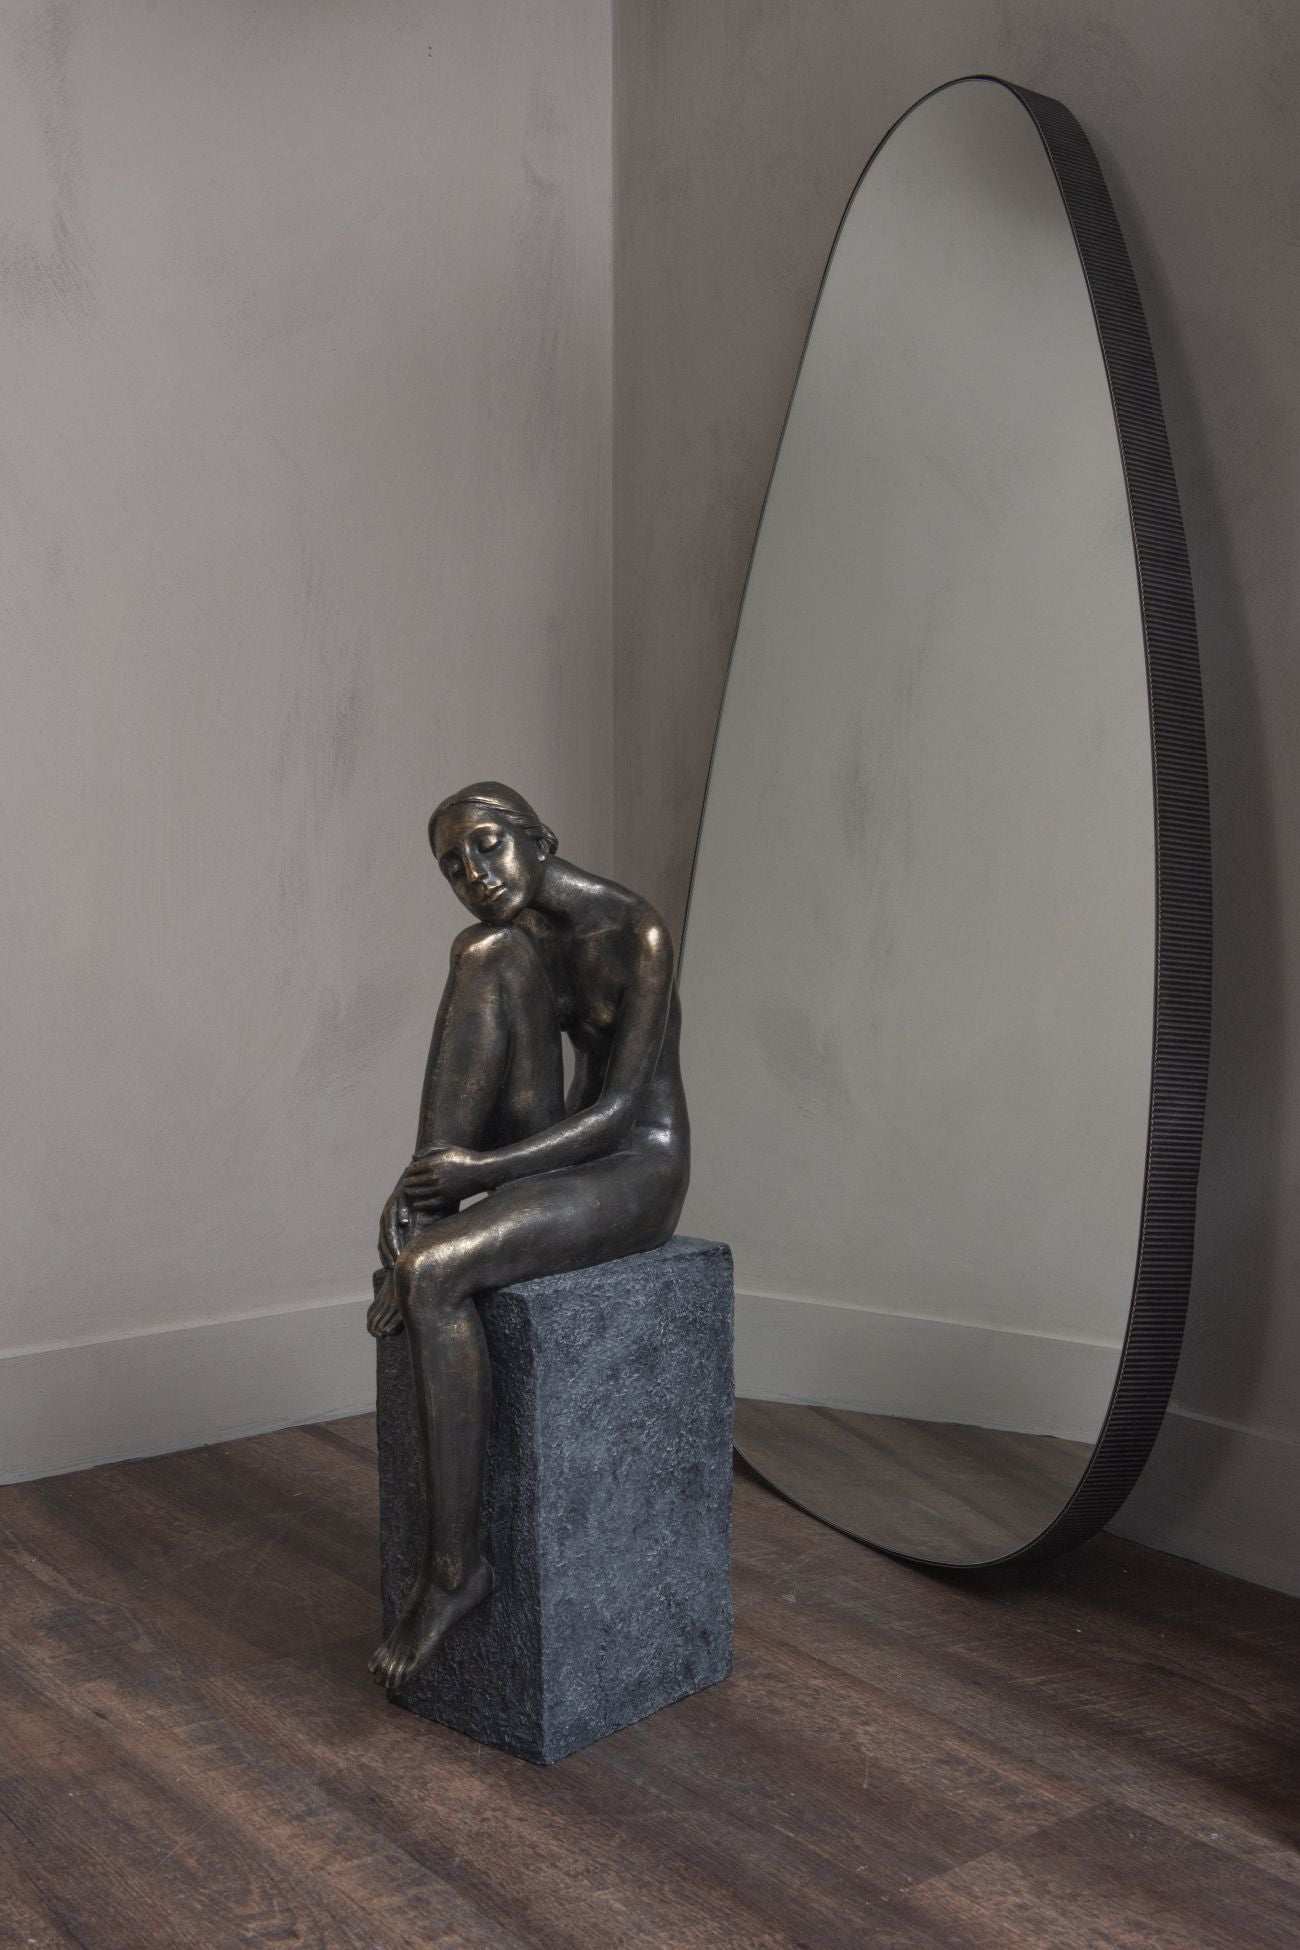 Thinking Lady Sculpture In Bronze Resin